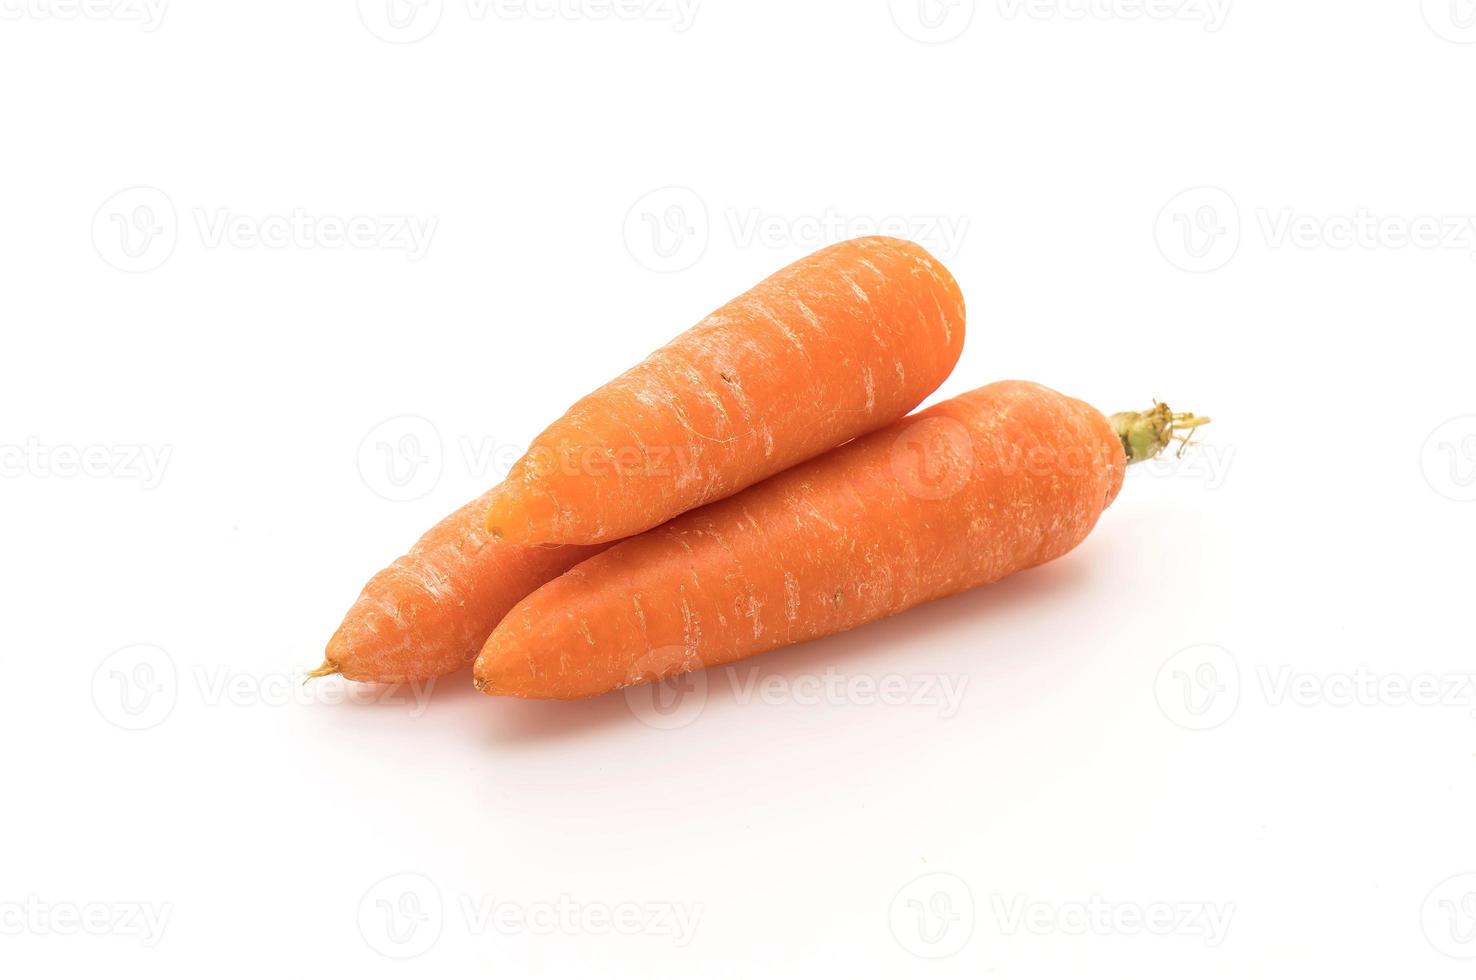 Baby carrots on white background photo